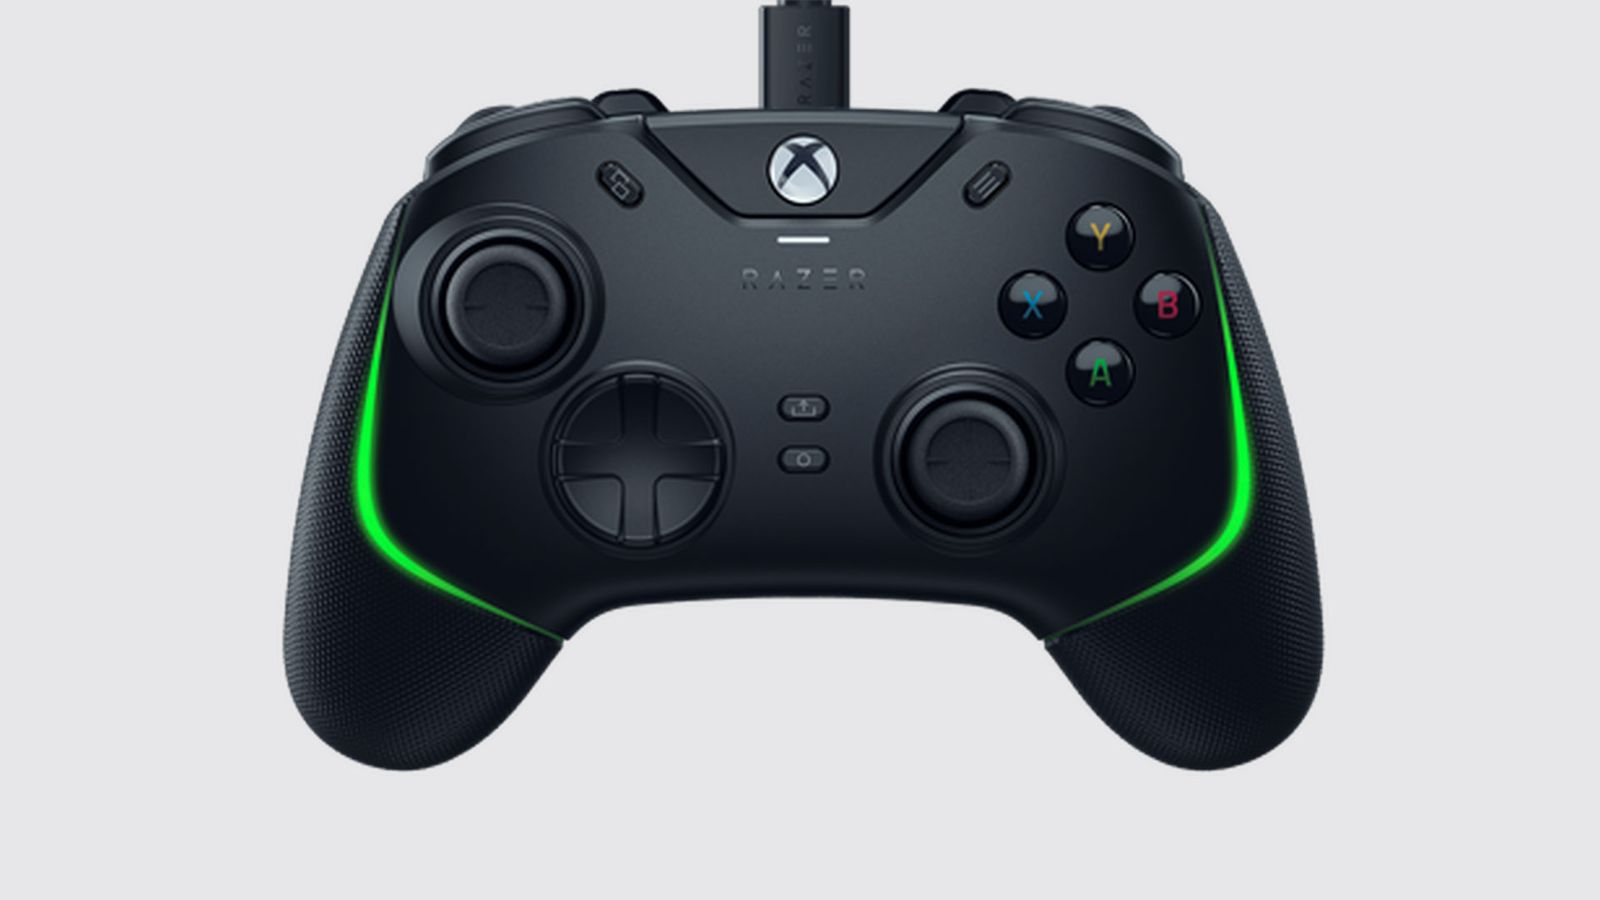 Razer Wolverine V2 product image of a black Xbox-style gamepad featuring green lighting.